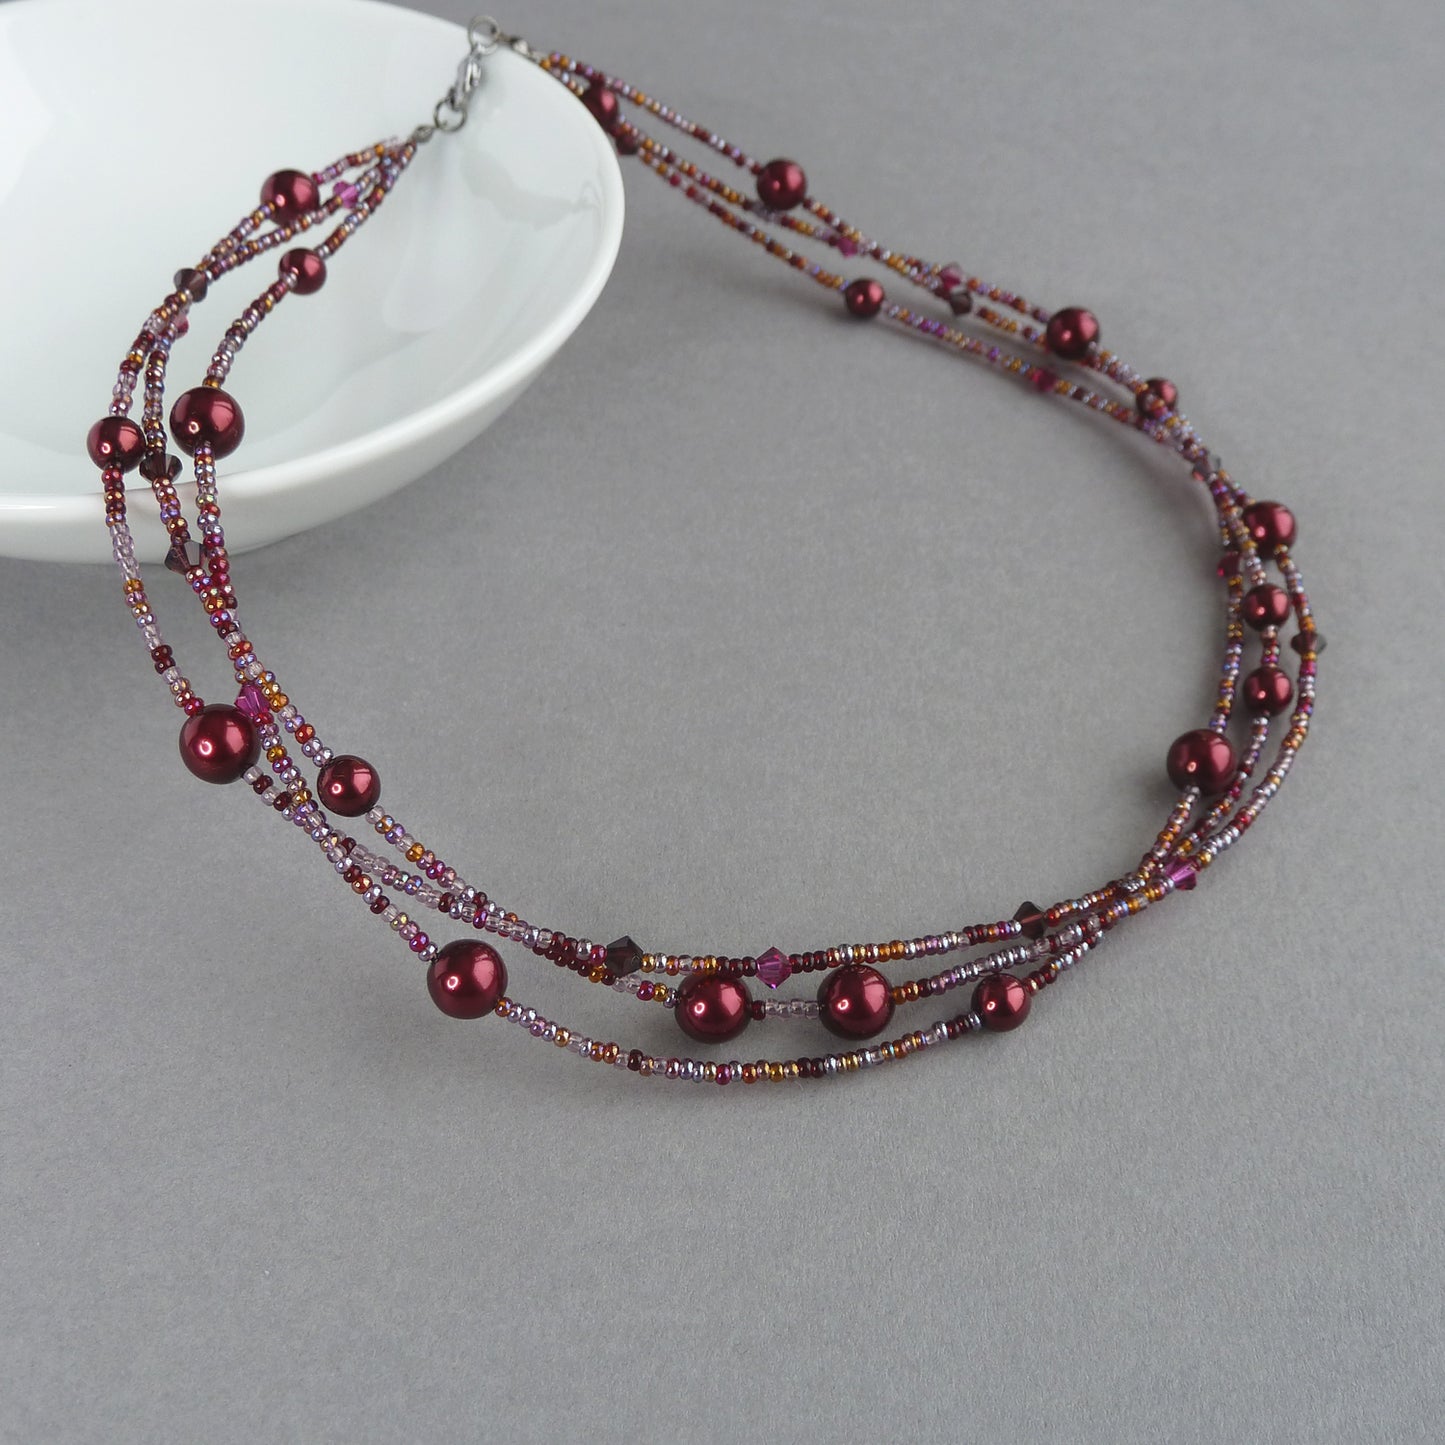 Burgundy pearl necklace